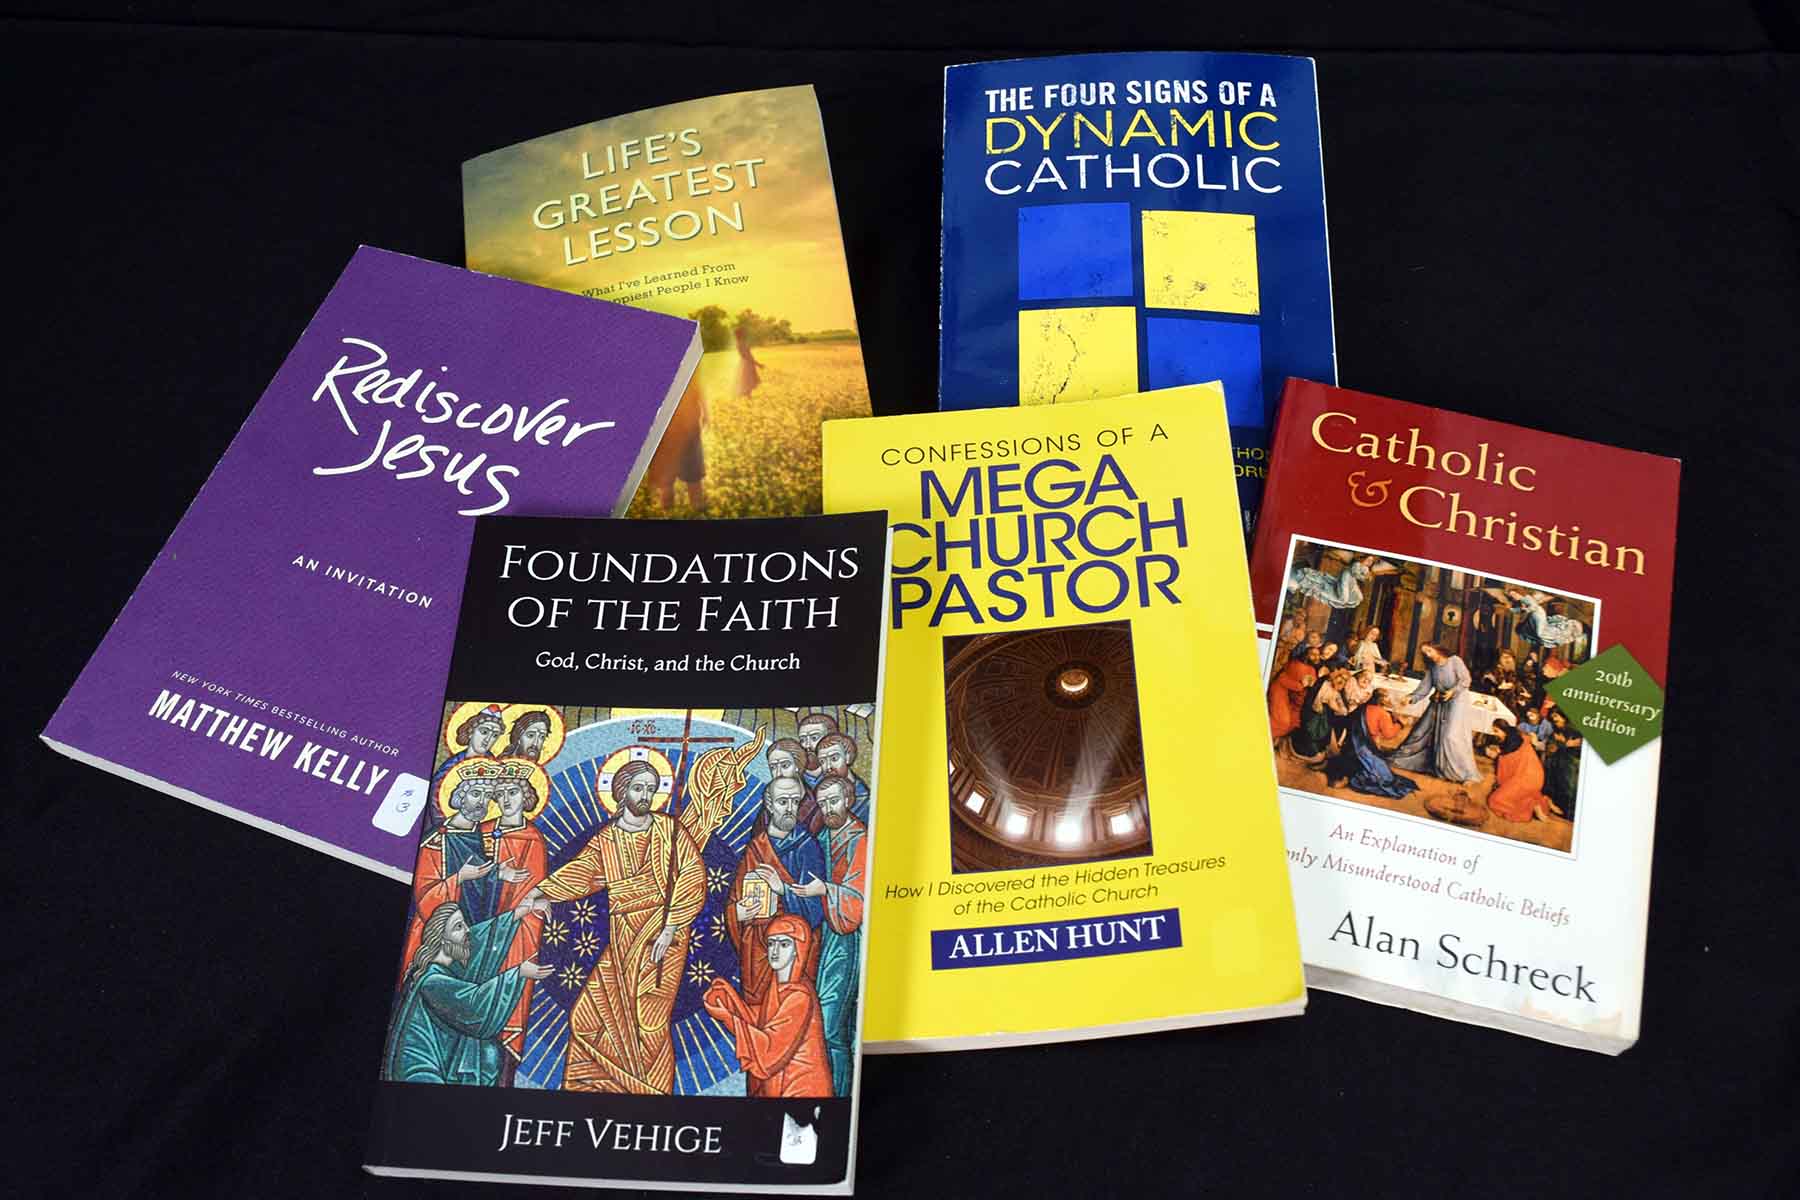 B15_Adult_Religious_books_-_Dynamic_Catholic,_Confessions_of_a_Mega_Church_Pastor,_Rediscover_Je.jpg